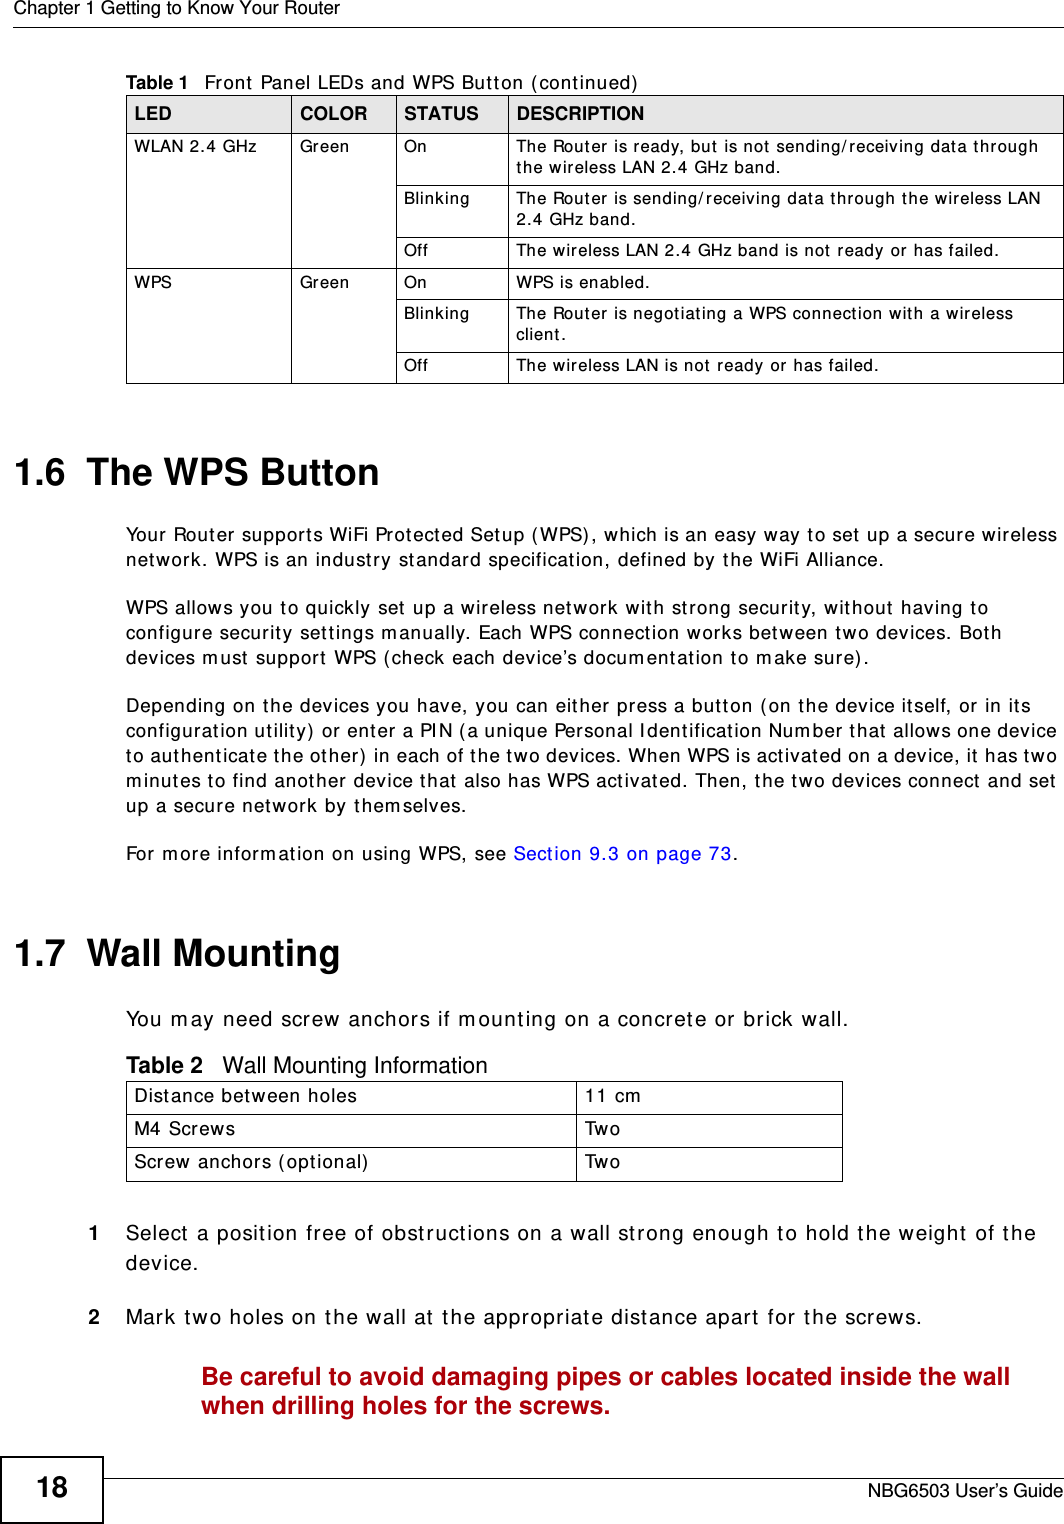 Chapter 1 Getting to Know Your RouterNBG6503 User’s Guide181.6  The WPS ButtonYour Router supports WiFi Protected Setup (WPS), which is an easy way to set up a secure wireless network. WPS is an industry standard specification, defined by the WiFi Alliance.WPS allows you to quickly set up a wireless network with strong security, without having to configure security settings manually. Each WPS connection works between two devices. Both devices must support WPS (check each device’s documentation to make sure). Depending on the devices you have, you can either press a button (on the device itself, or in its configuration utility) or enter a PIN (a unique Personal Identification Number that allows one device to authenticate the other) in each of the two devices. When WPS is activated on a device, it has two minutes to find another device that also has WPS activated. Then, the two devices connect and set up a secure network by themselves.For more information on using WPS, see Section 9.3 on page 73.1.7  Wall MountingYou may need screw anchors if mounting on a concrete or brick wall.1Select a position free of obstructions on a wall strong enough to hold the weight of the device. 2Mark two holes on the wall at the appropriate distance apart for the screws.Be careful to avoid damaging pipes or cables located inside the wall when drilling holes for the screws.WLAN 2.4 GHz Green On The Router is ready, but is not sending/receiving data through the wireless LAN 2.4 GHz band. Blinking The Router is sending/receiving data through the wireless LAN 2.4 GHz band.Off The wireless LAN 2.4 GHz band is not ready or has failed.WPS Green On WPS is enabled. Blinking The Router is negotiating a WPS connection with a wireless client.Off The wireless LAN is not ready or has failed.Table 1   Front Panel LEDs and WPS Button (continued)LED COLOR STATUS DESCRIPTIONTable 2   Wall Mounting InformationDistance between holes 11 cmM4 Screws TwoScrew anchors (optional) Two